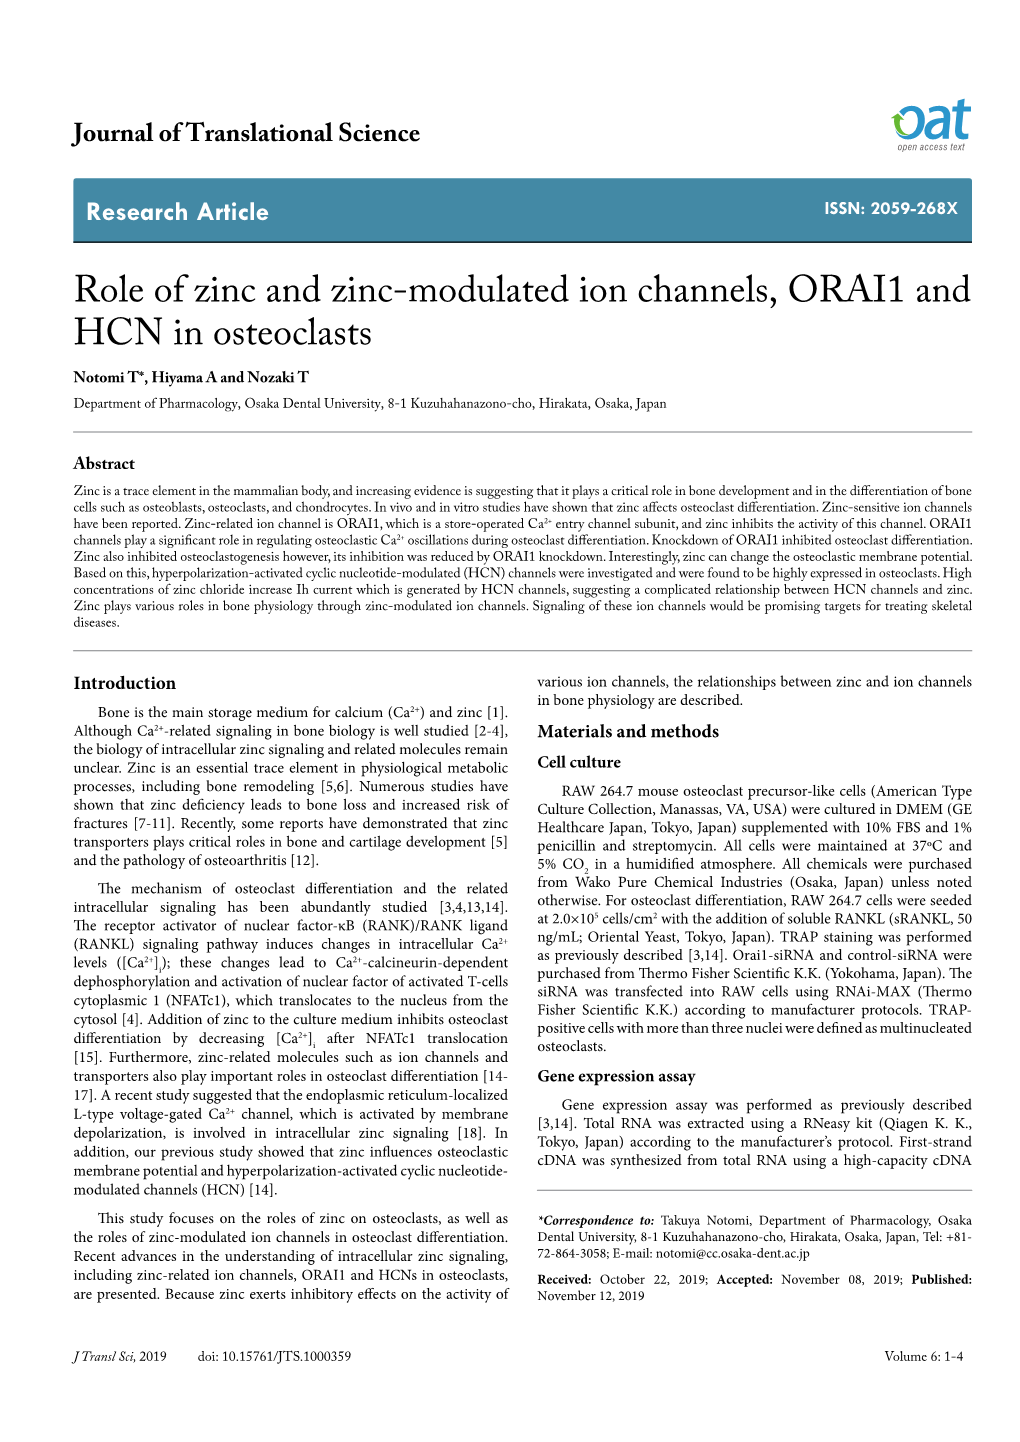 Role of Zinc and Zinc-Modulated Ion Channels, ORAI1 and HCN In